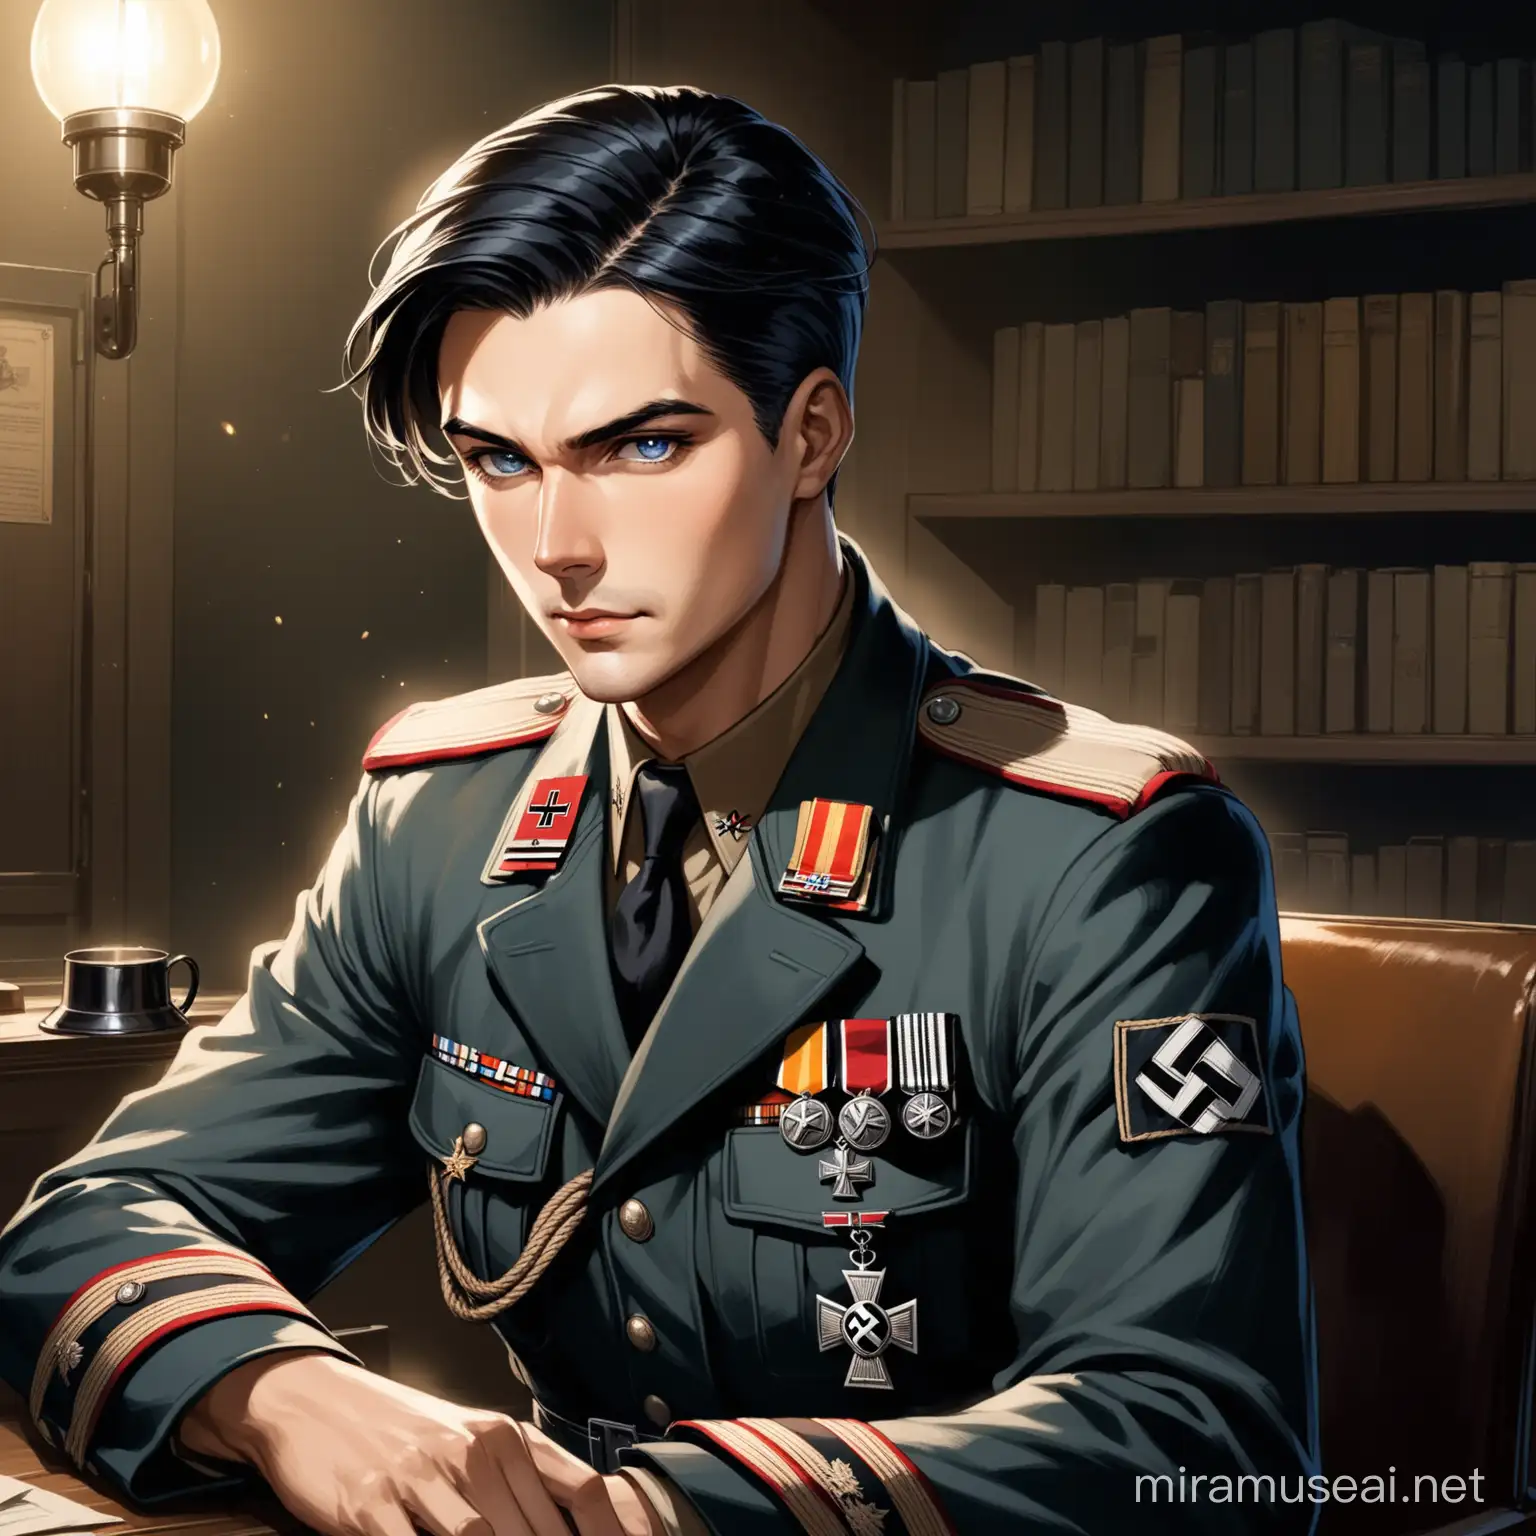 A very handsome German semi-realism art-style man in an almost semi-anime-like, an SS officer in a Nazi military uniform adorned with medals of valor, Trench coat to fend off the cold with a swastika armband, Gunmetal blue colored eyes, Cropped, jet-black hair swept to the side. Sitting in an old rich-looking office with dim light almost nigh, and wartime memorabilia.